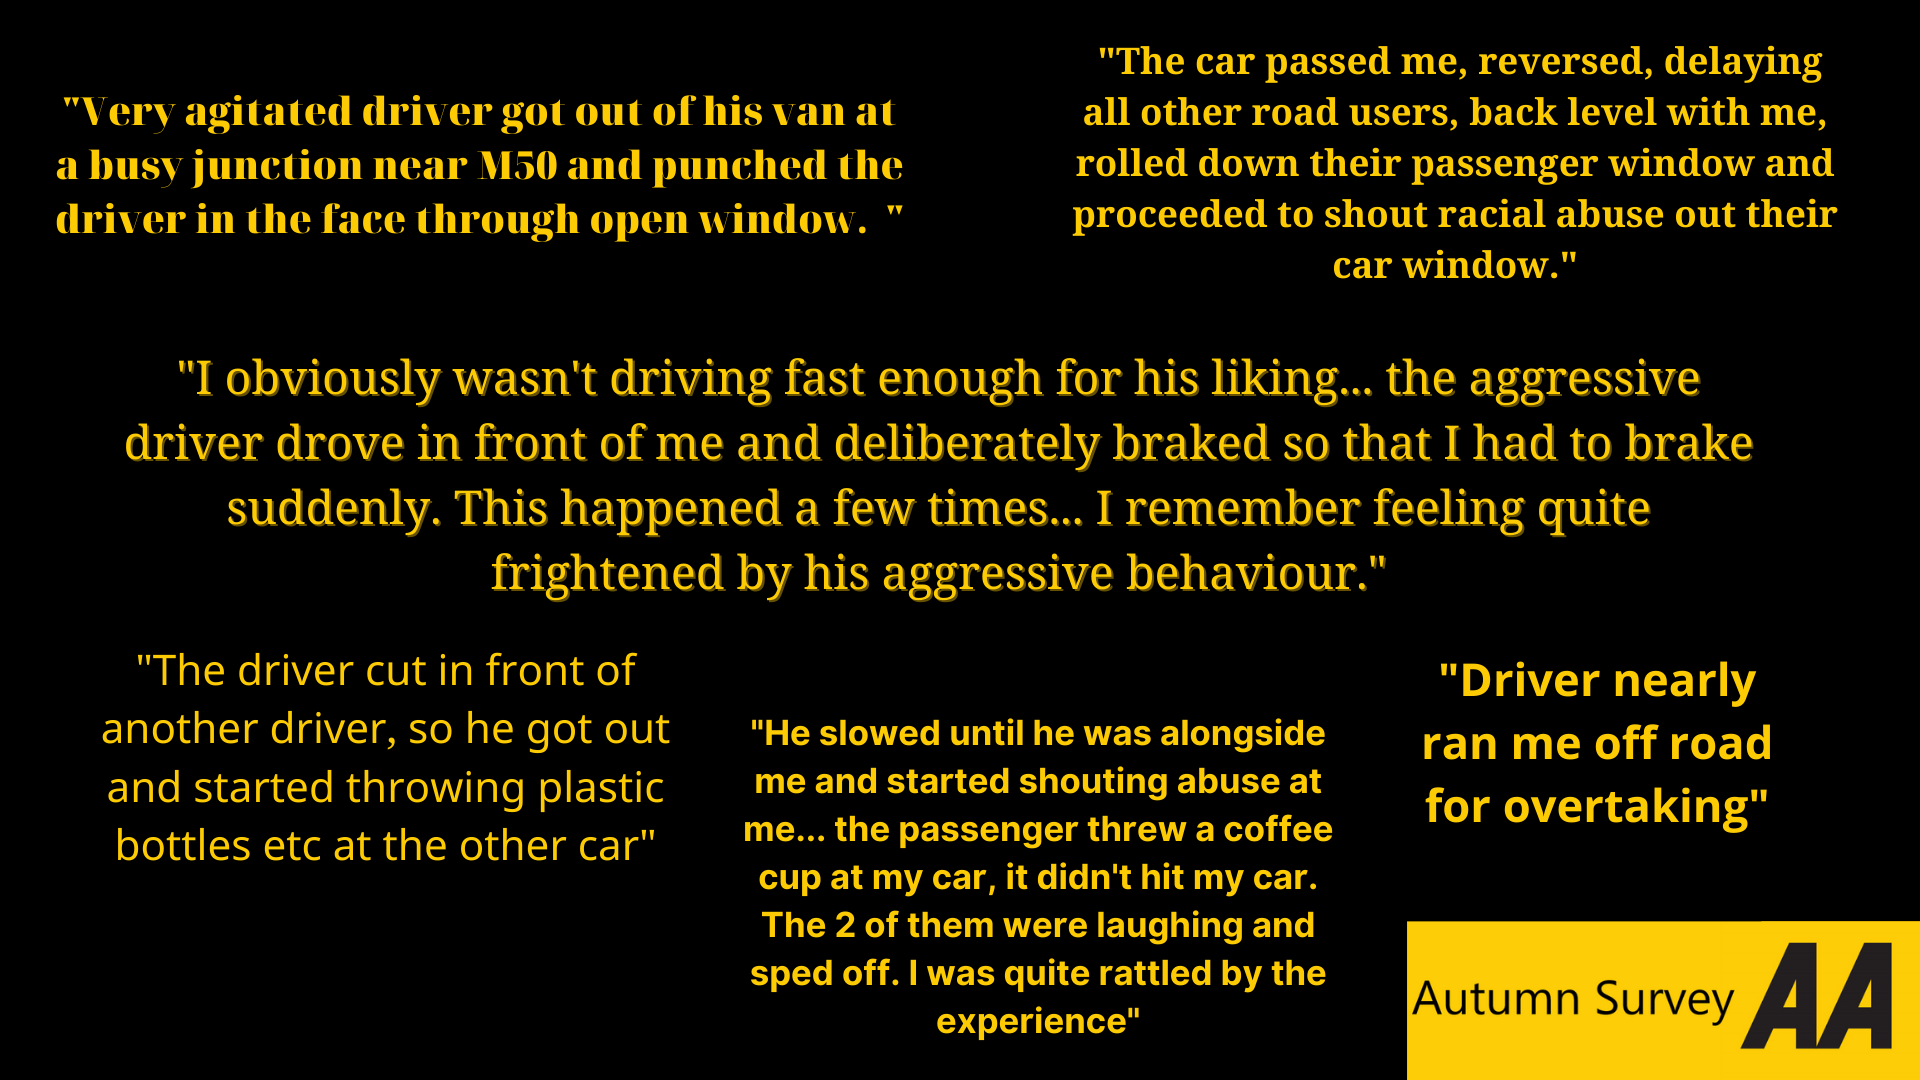 Graphic showing several comments from our survey respondents about road rage, including experiences of aggressive brake-testing, coffee cups and plastic bottles being thrown at a car, racial abuse being shouted and driver being punched through an open window.